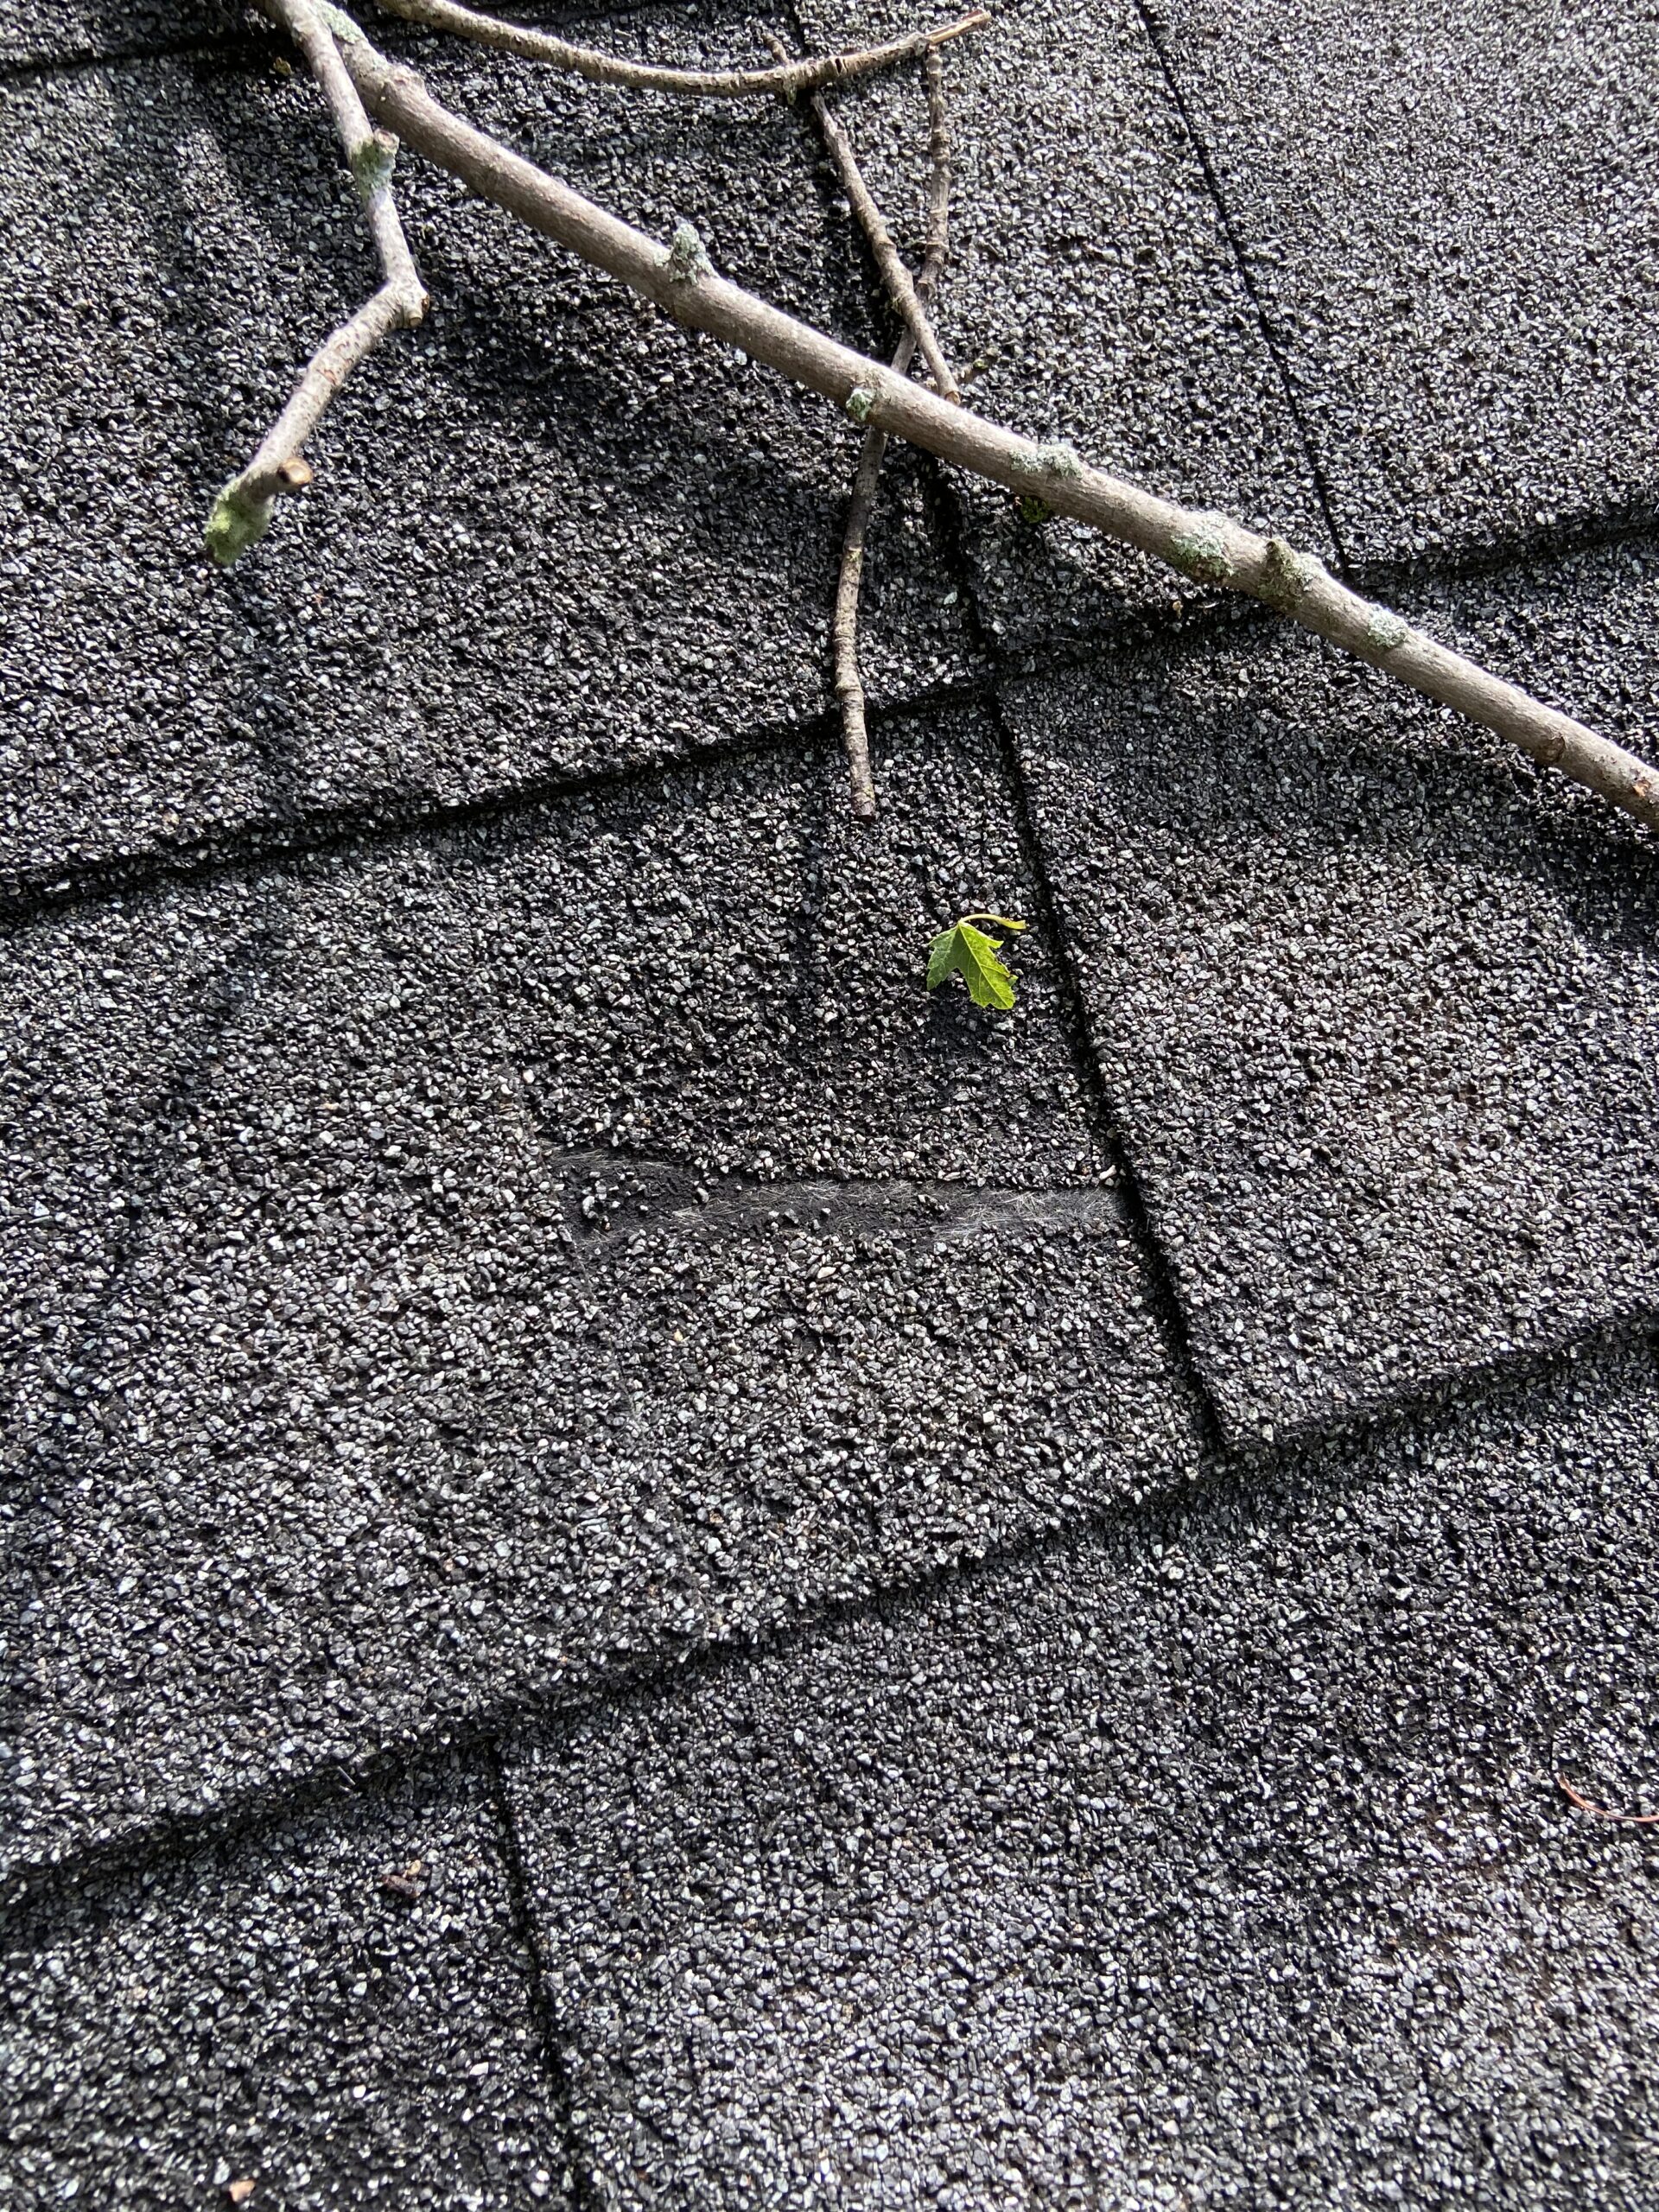 picture of a shingle on a roof that has fiberglass matt showing